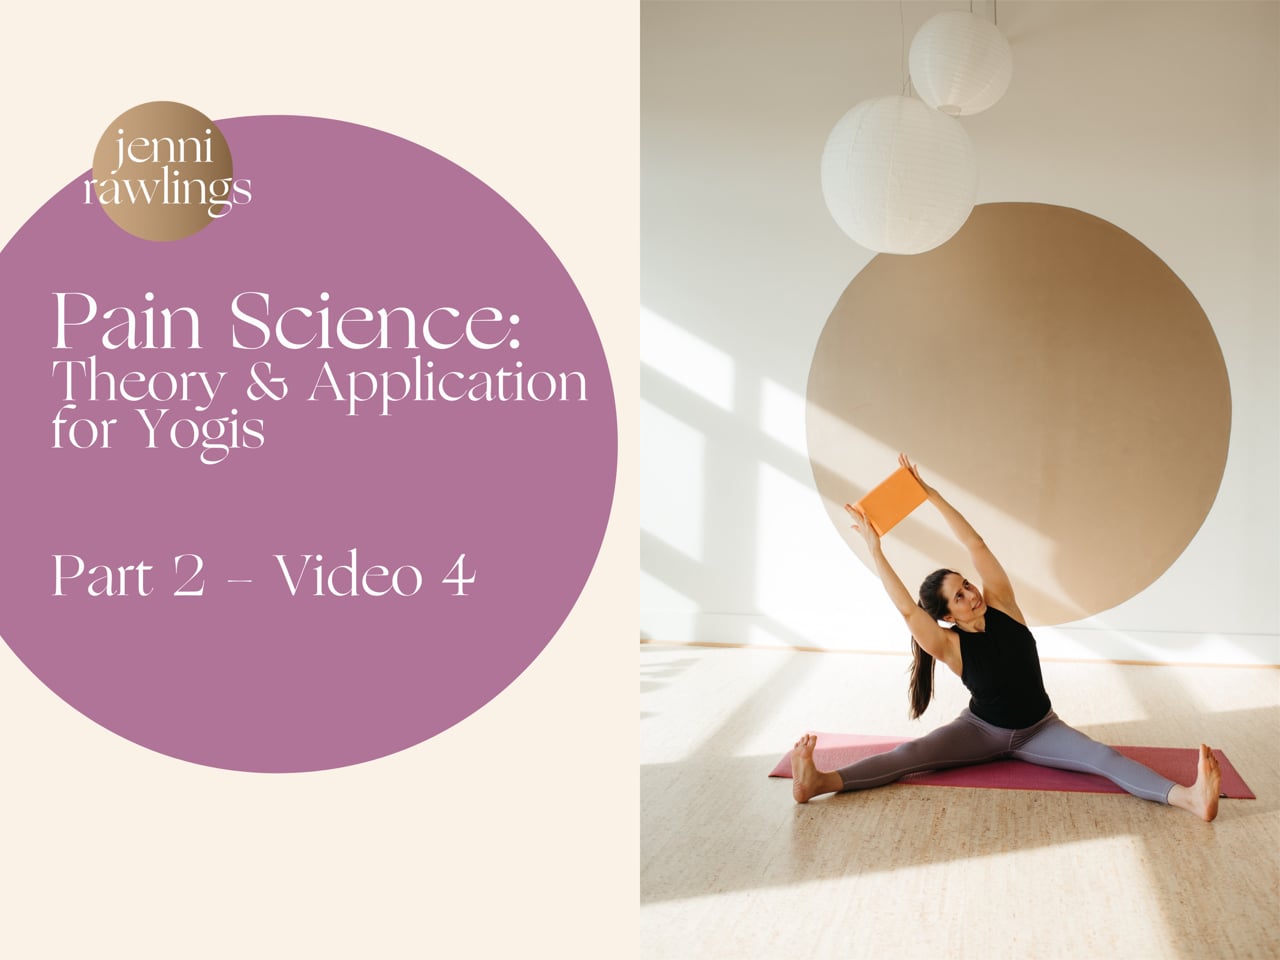 Pain Science for Yogis Part 2, Video 4